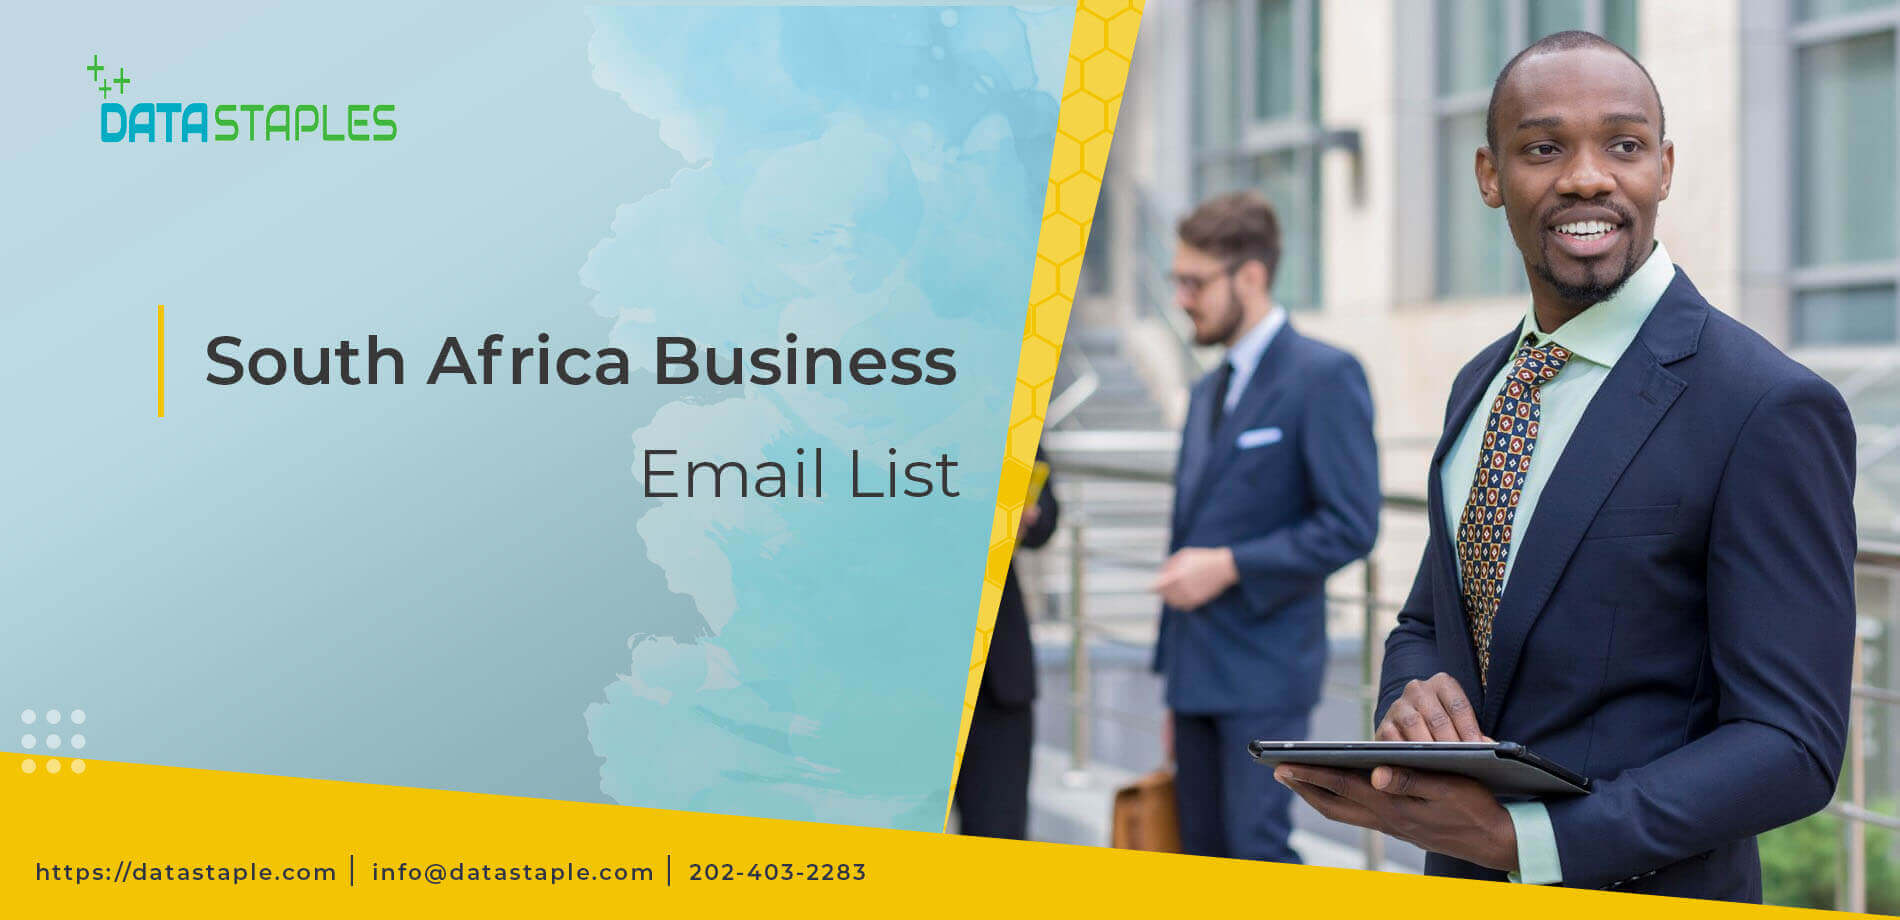 South Africa Business Email List | DataStaples